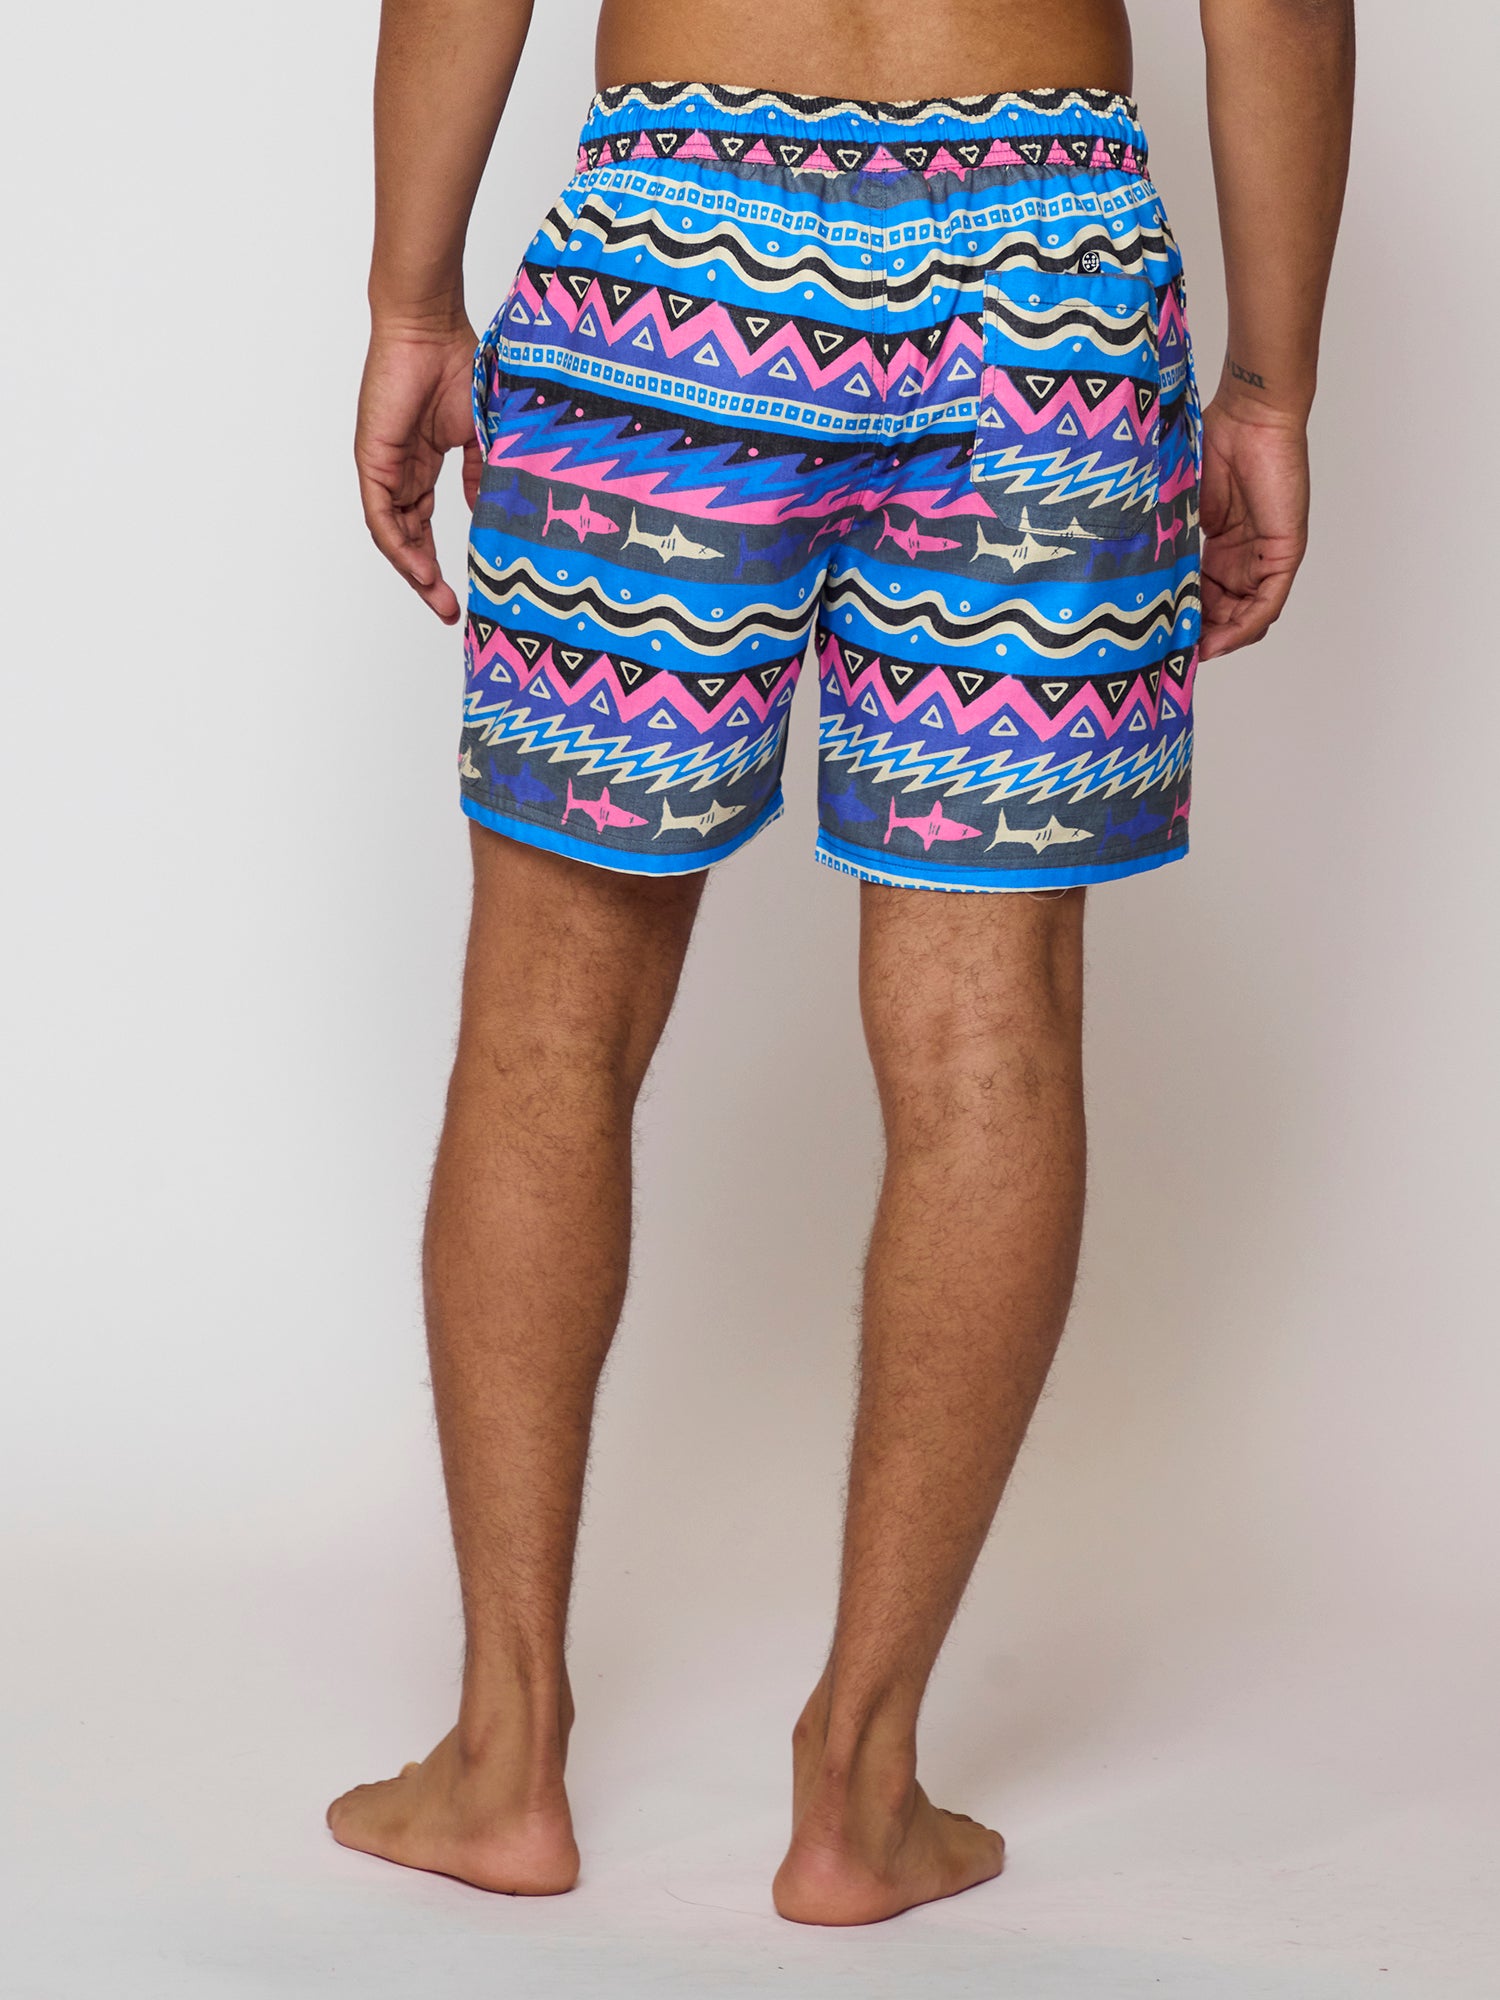 Stoker Pool Shorts in Blue